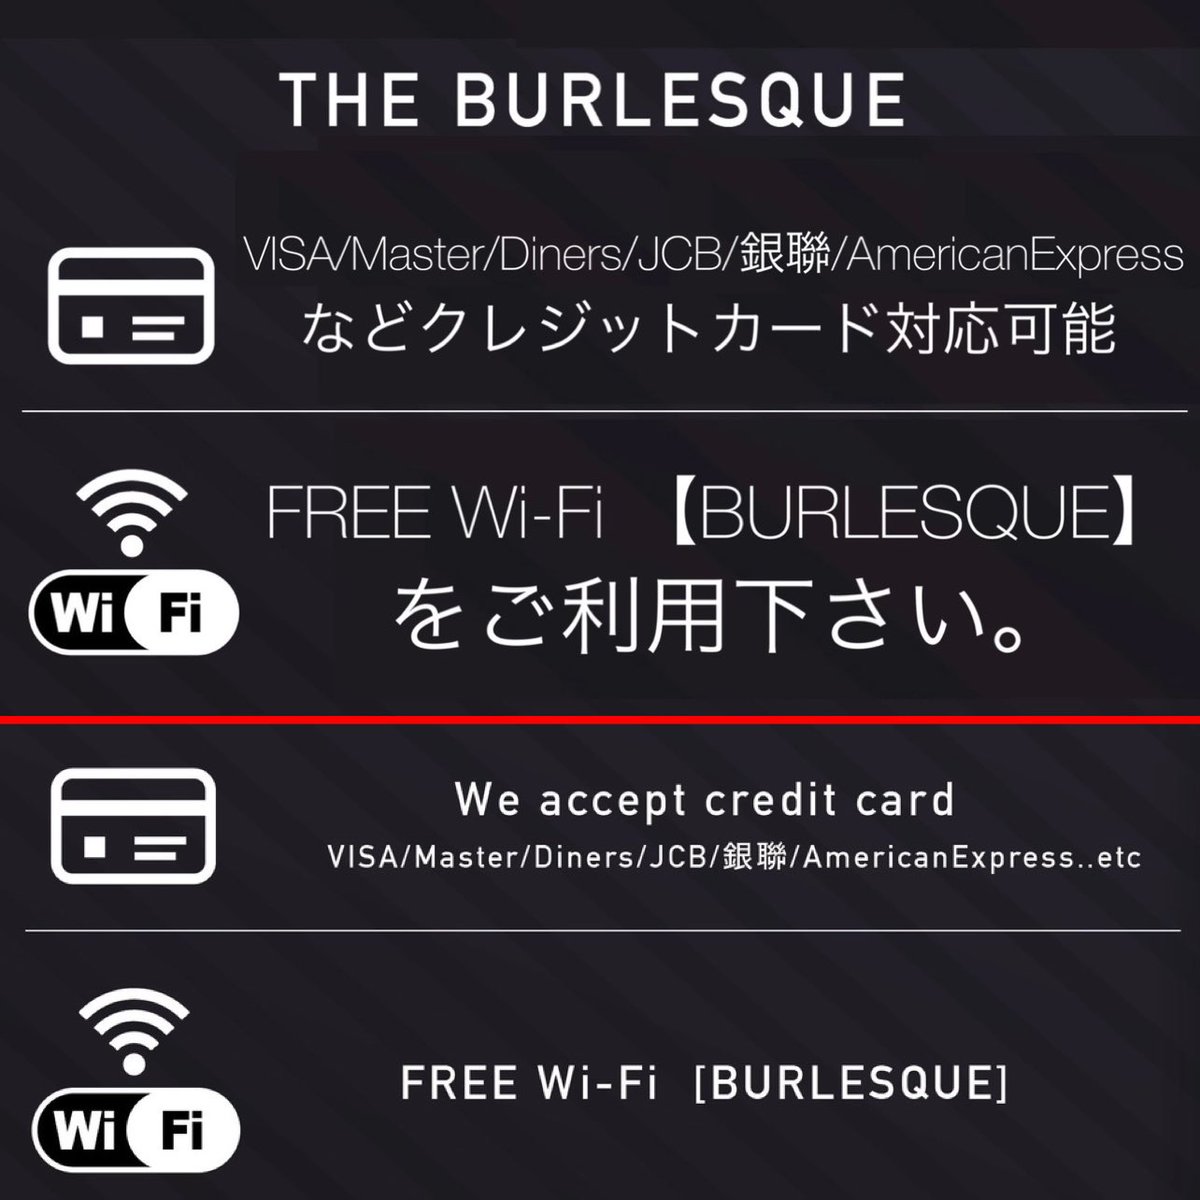 📢THE BURLESQUE 共有事項📢

💳 VISA/Master/Diners/JCB/銀聯/AmericanExpressなどクレジットカード対応可能👍

📶FREE Wi-Fi【BURLESQUE】をご利用下さい

Credit cards such as VISA/Master/Diners/JCB/UnionPay/AmericanExpress are accepted.

Please use FREE Wi-Fi [BURLESQUE].